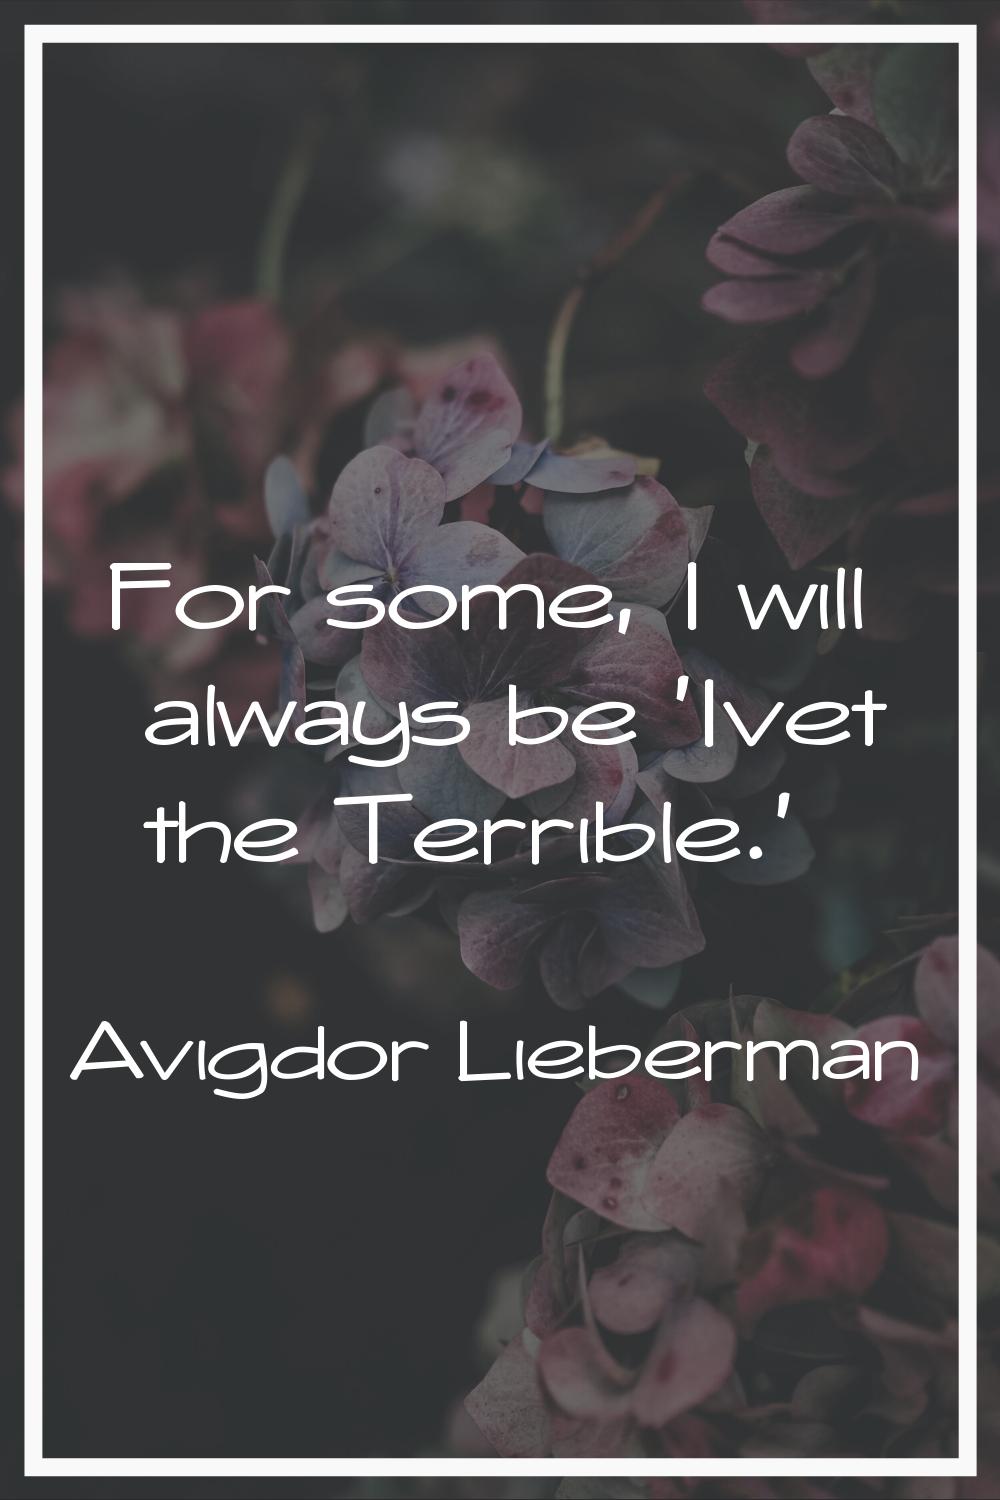 For some, I will always be 'Ivet the Terrible.'